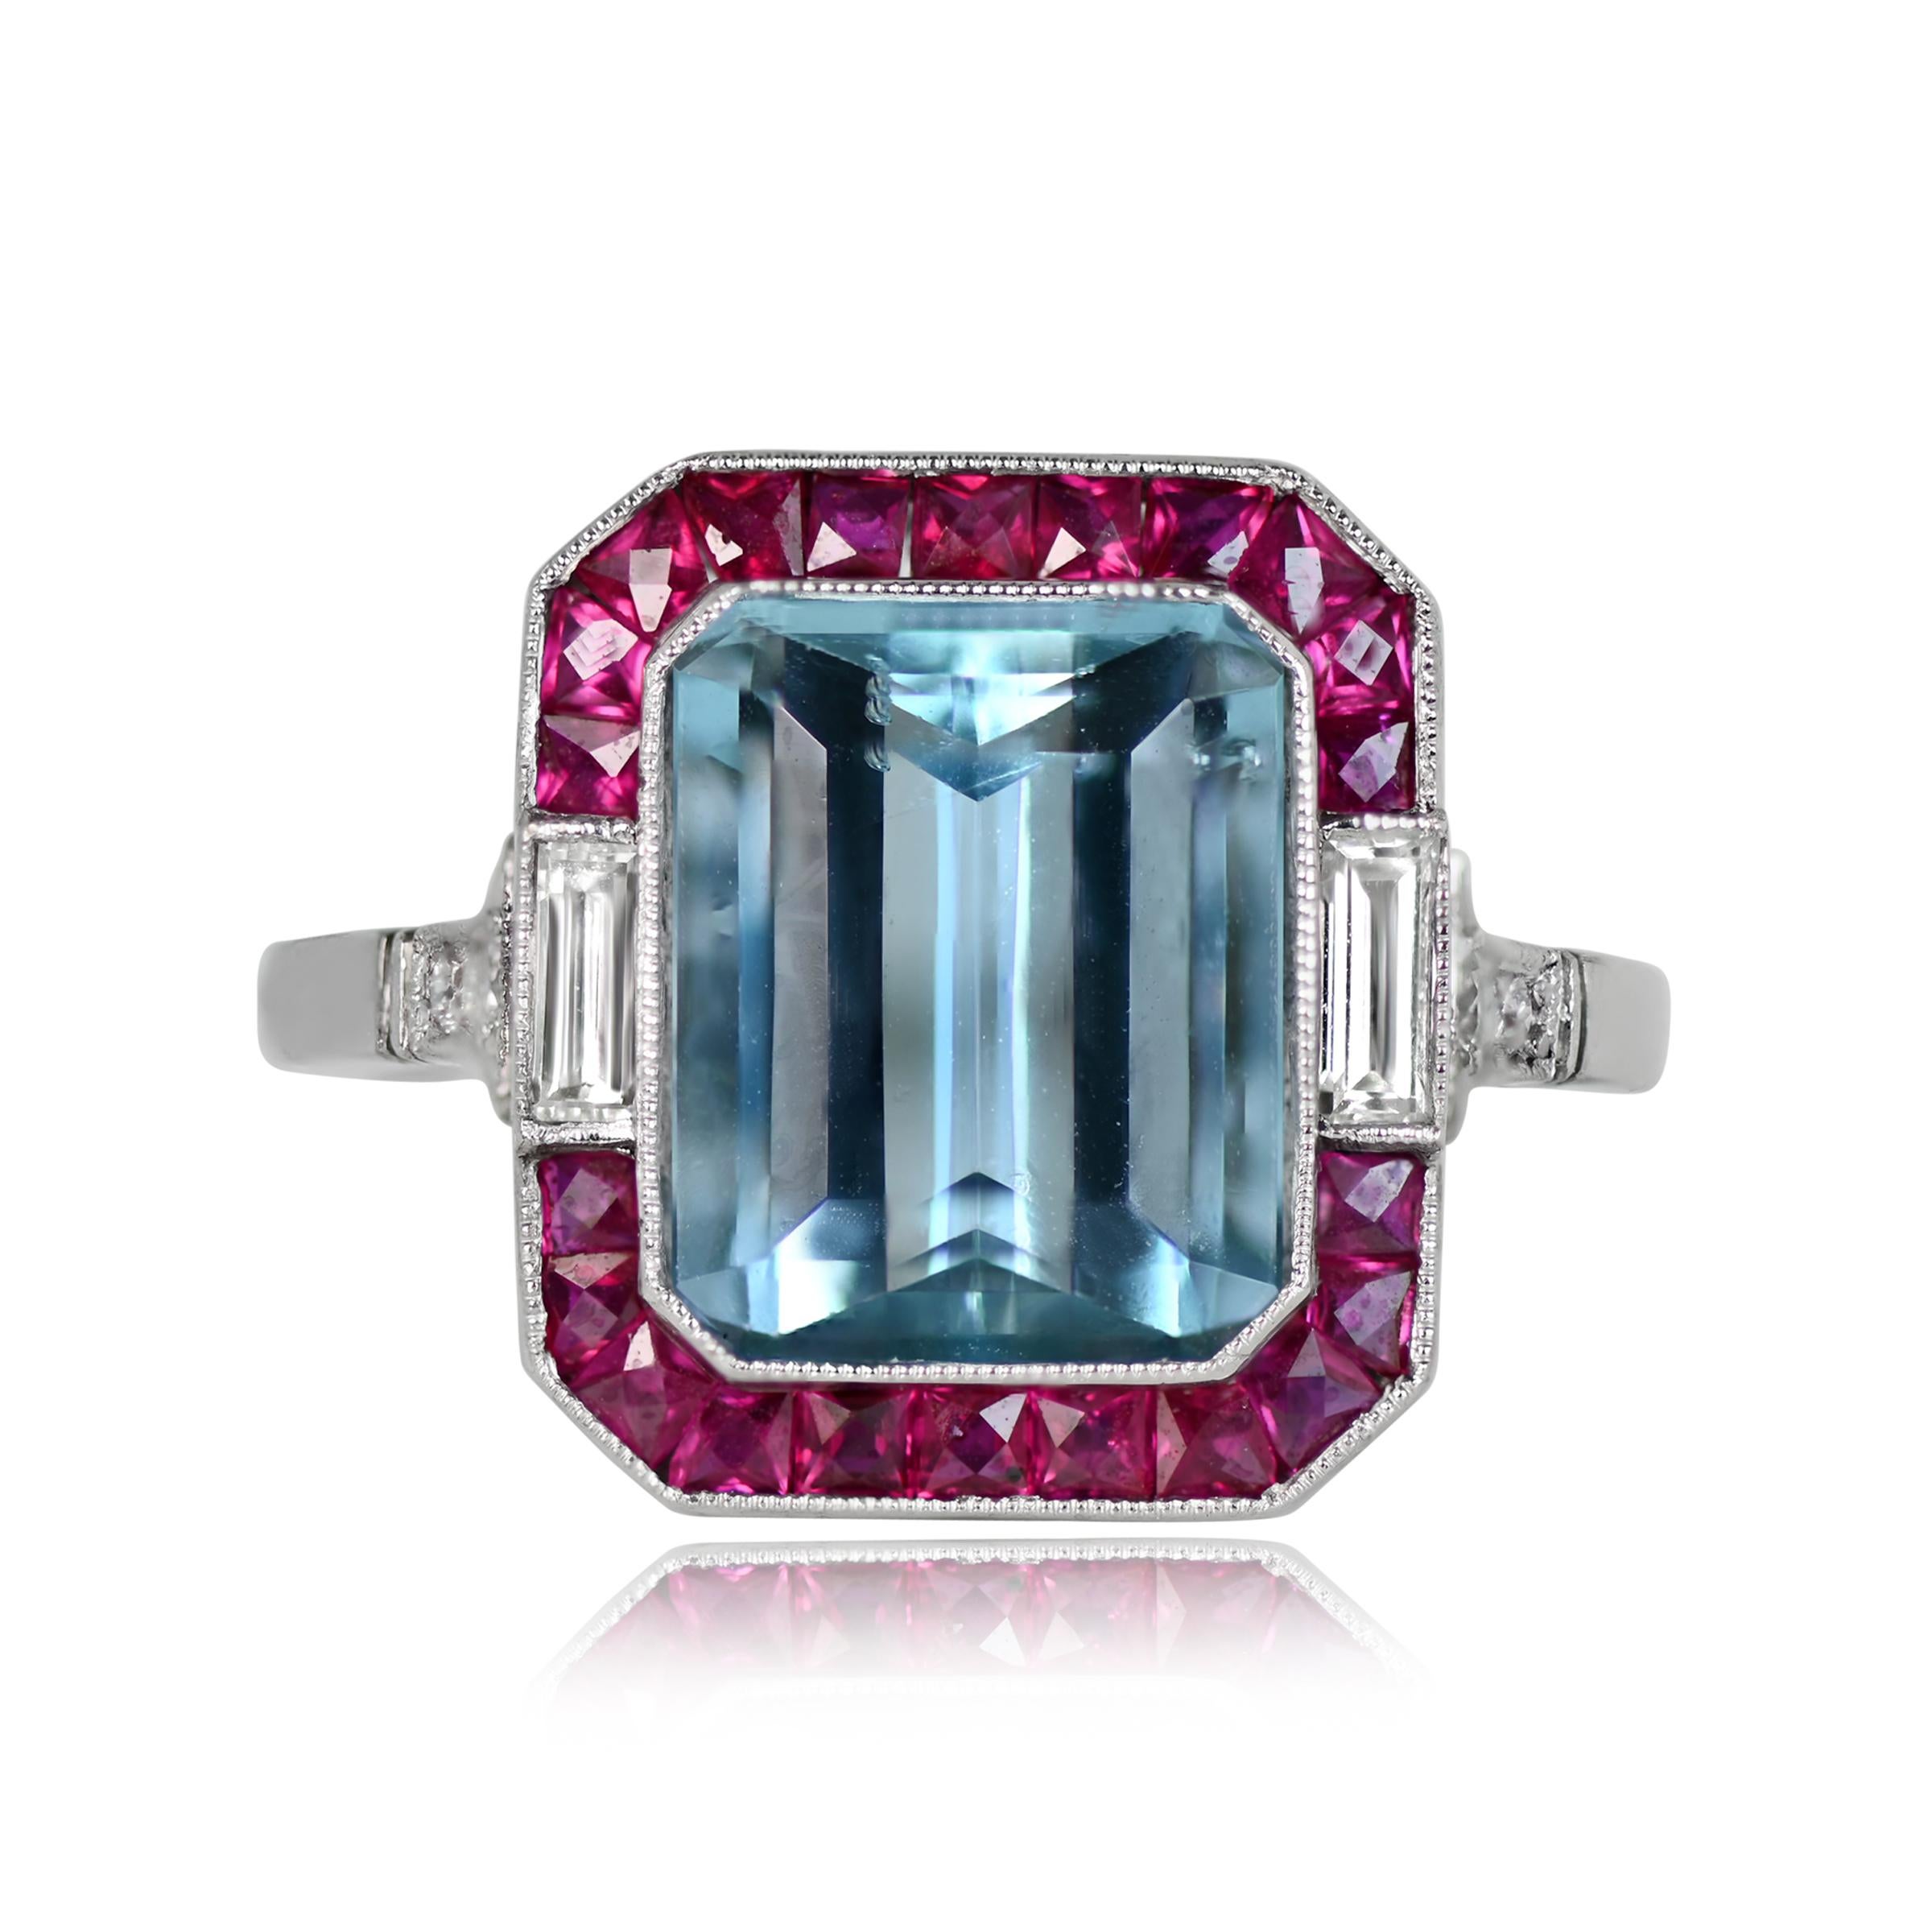 A captivating piece, this 3.25-carat aquamarine ring boasts a vibrant light blue hue. Set in a handcrafted platinum mounting, the aquamarine is surrounded by a halo of calibre cut rubies, adding a touch of color contrast. Further enhancing the